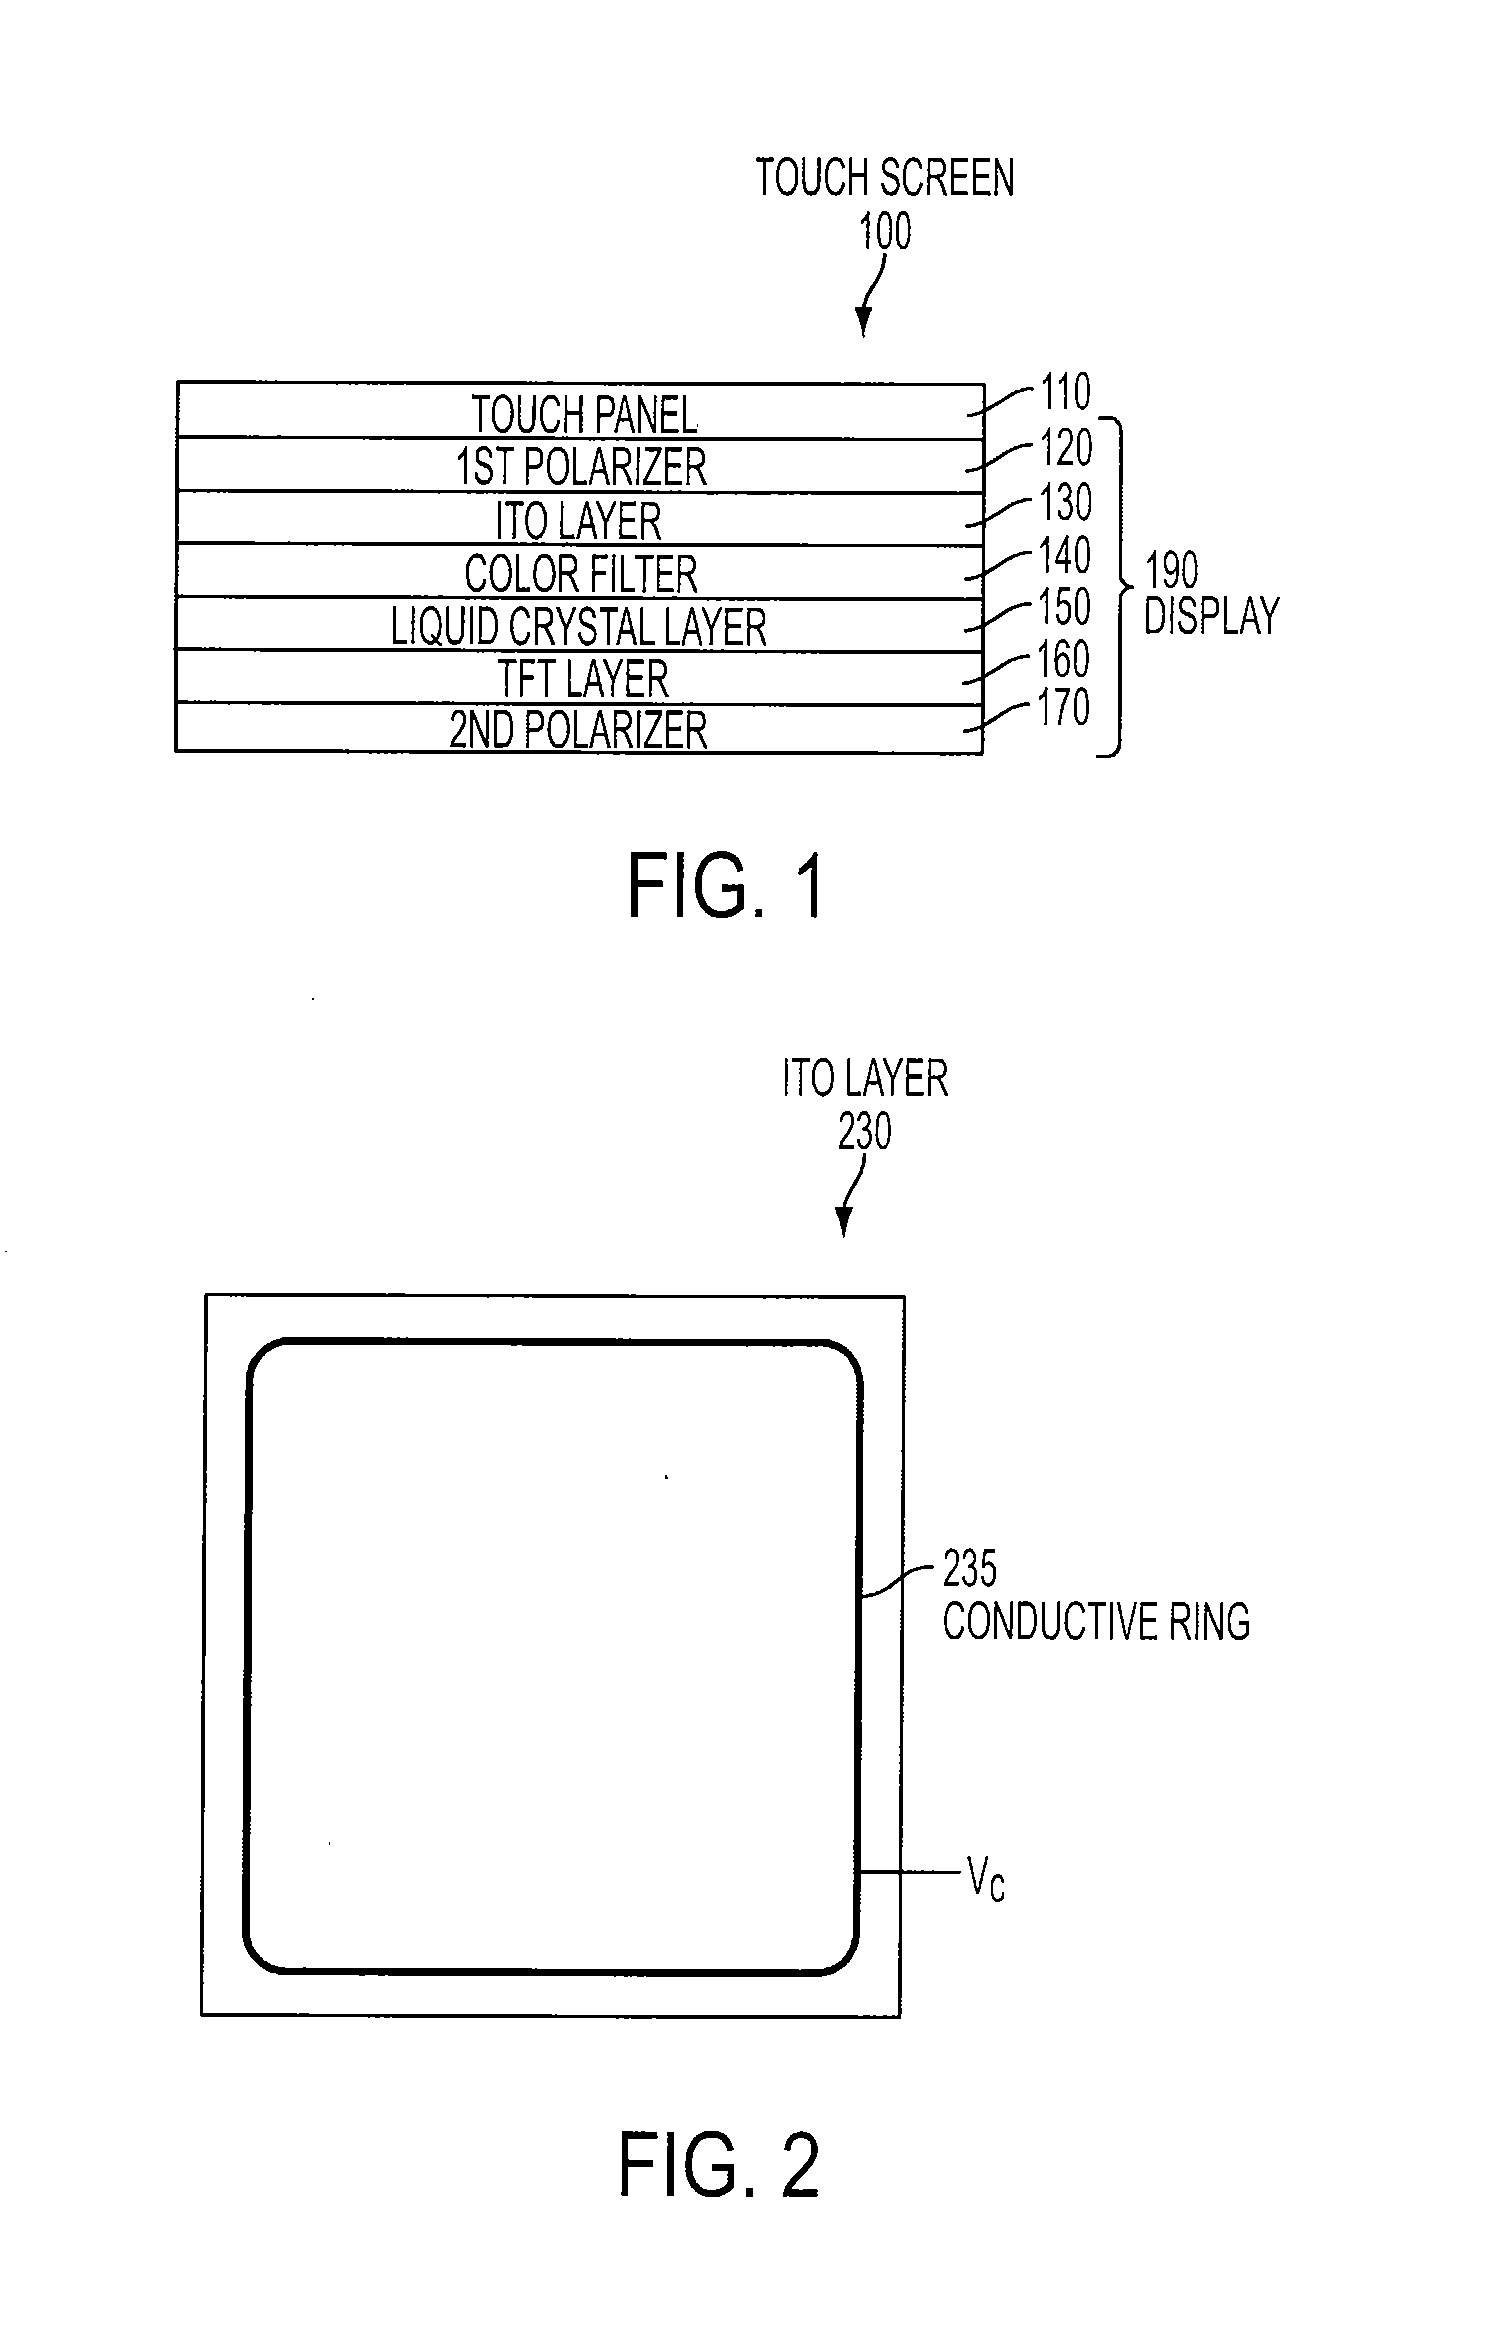 Periphery Conductive Element for Touch Screen